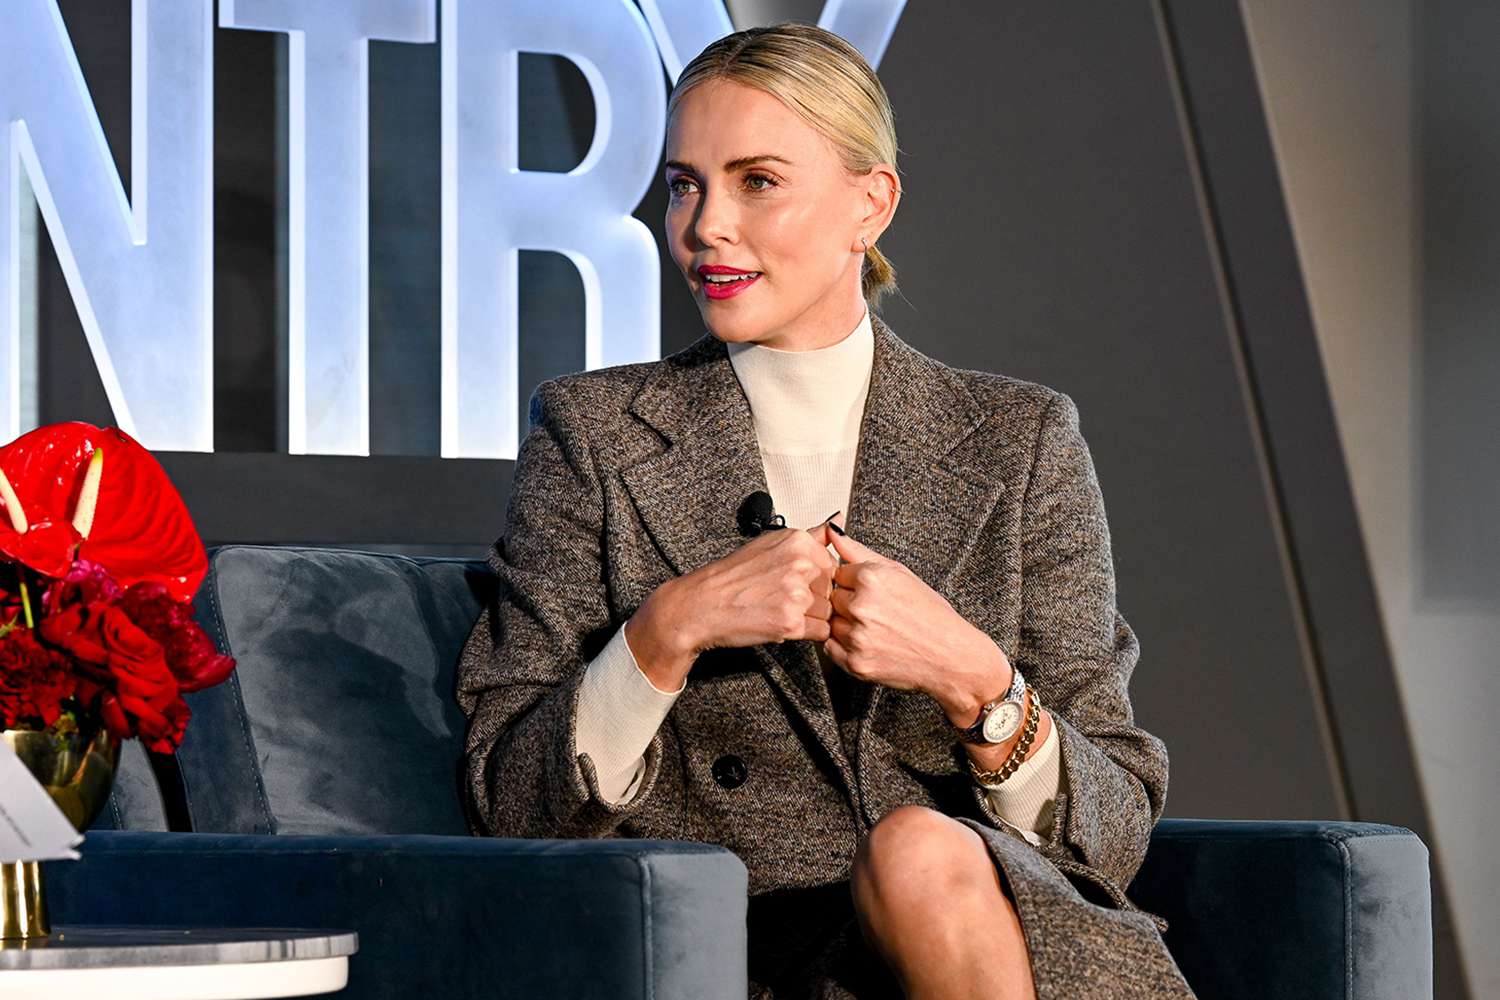 Charlize theron wearing a gray coat while sitting on talking to someone